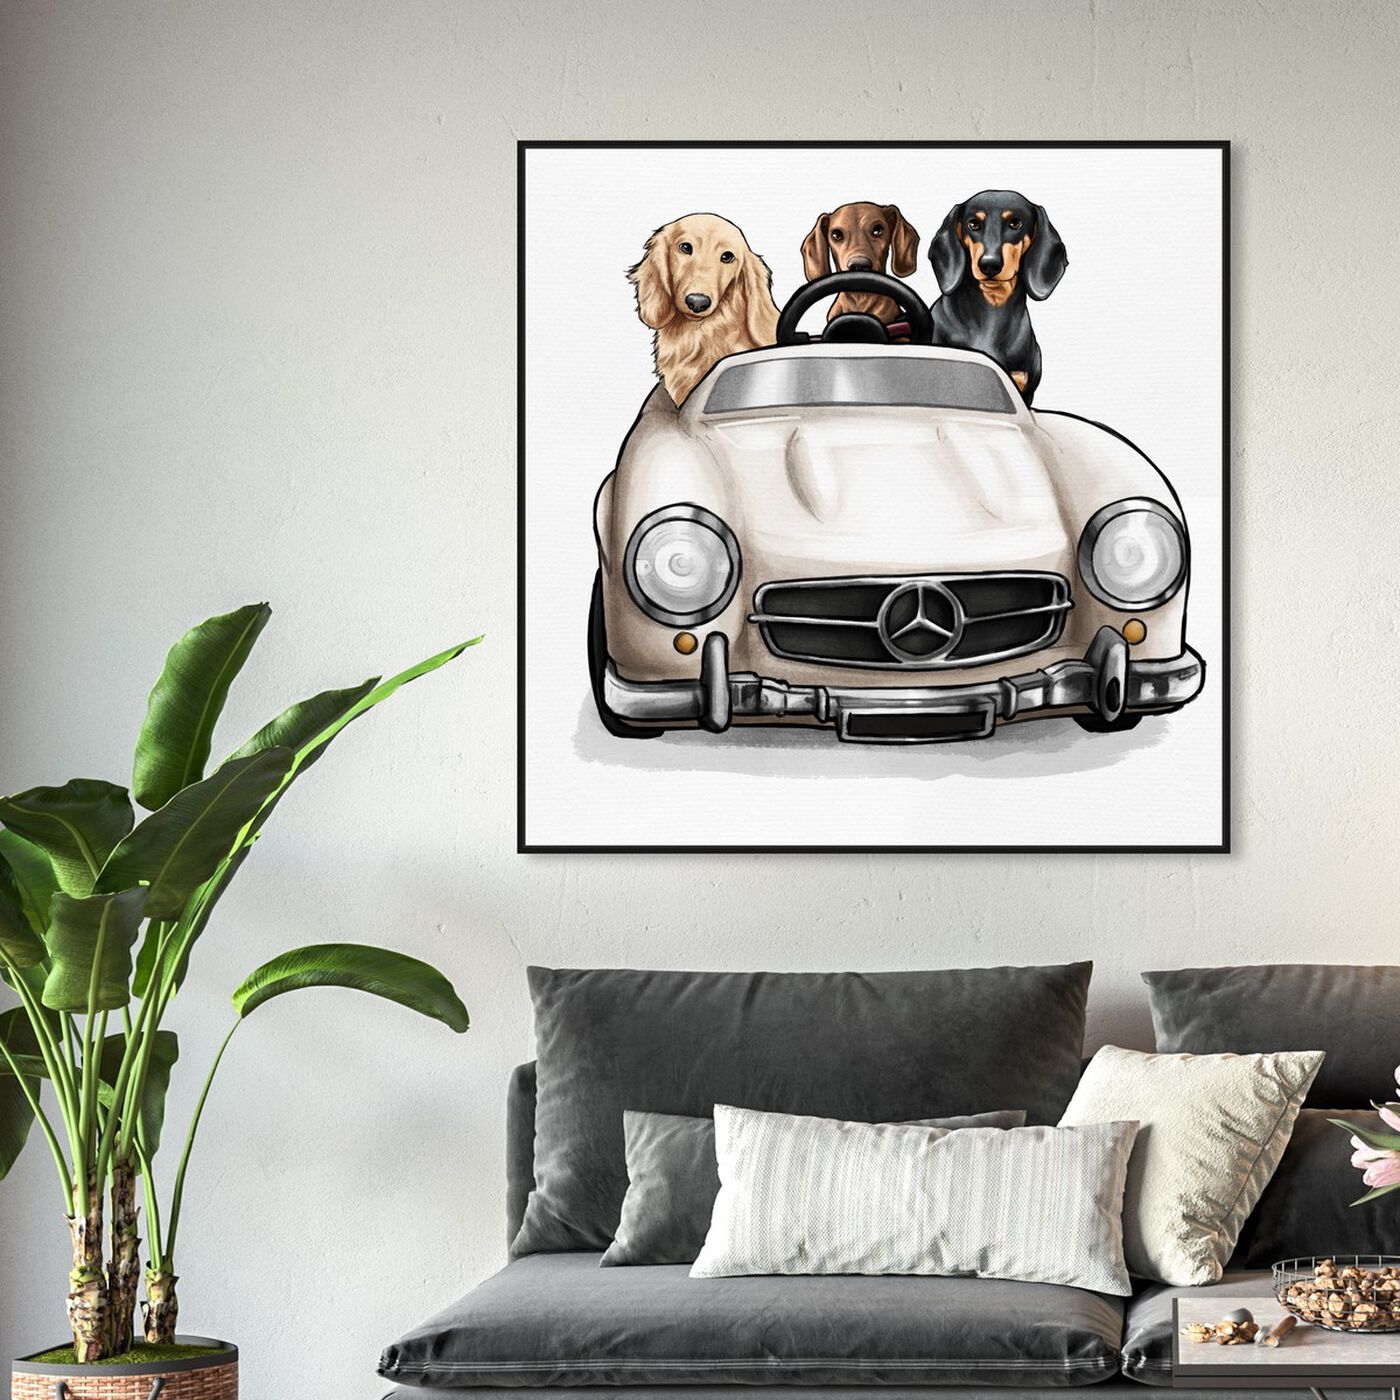 Hanging view of Strolling in Style dachshunds featuring animals and dogs and puppies art.